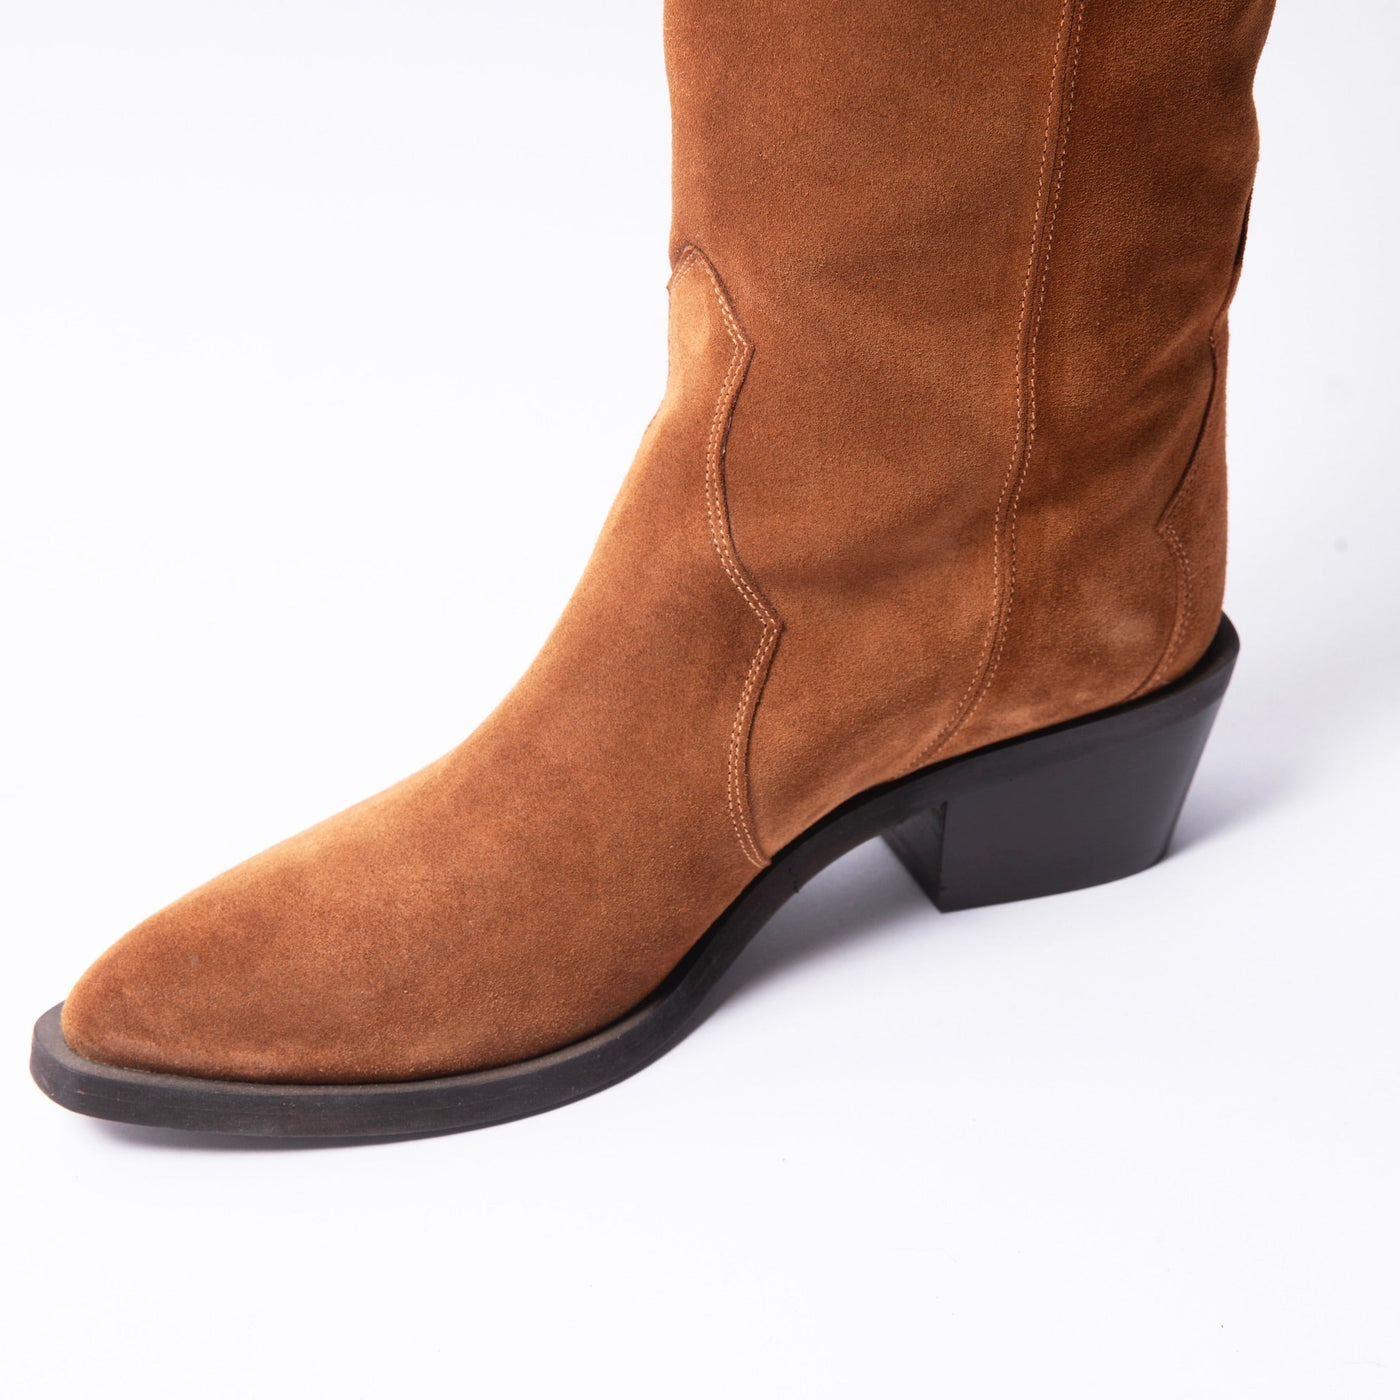 Western inspired boots in brown suede leather. 